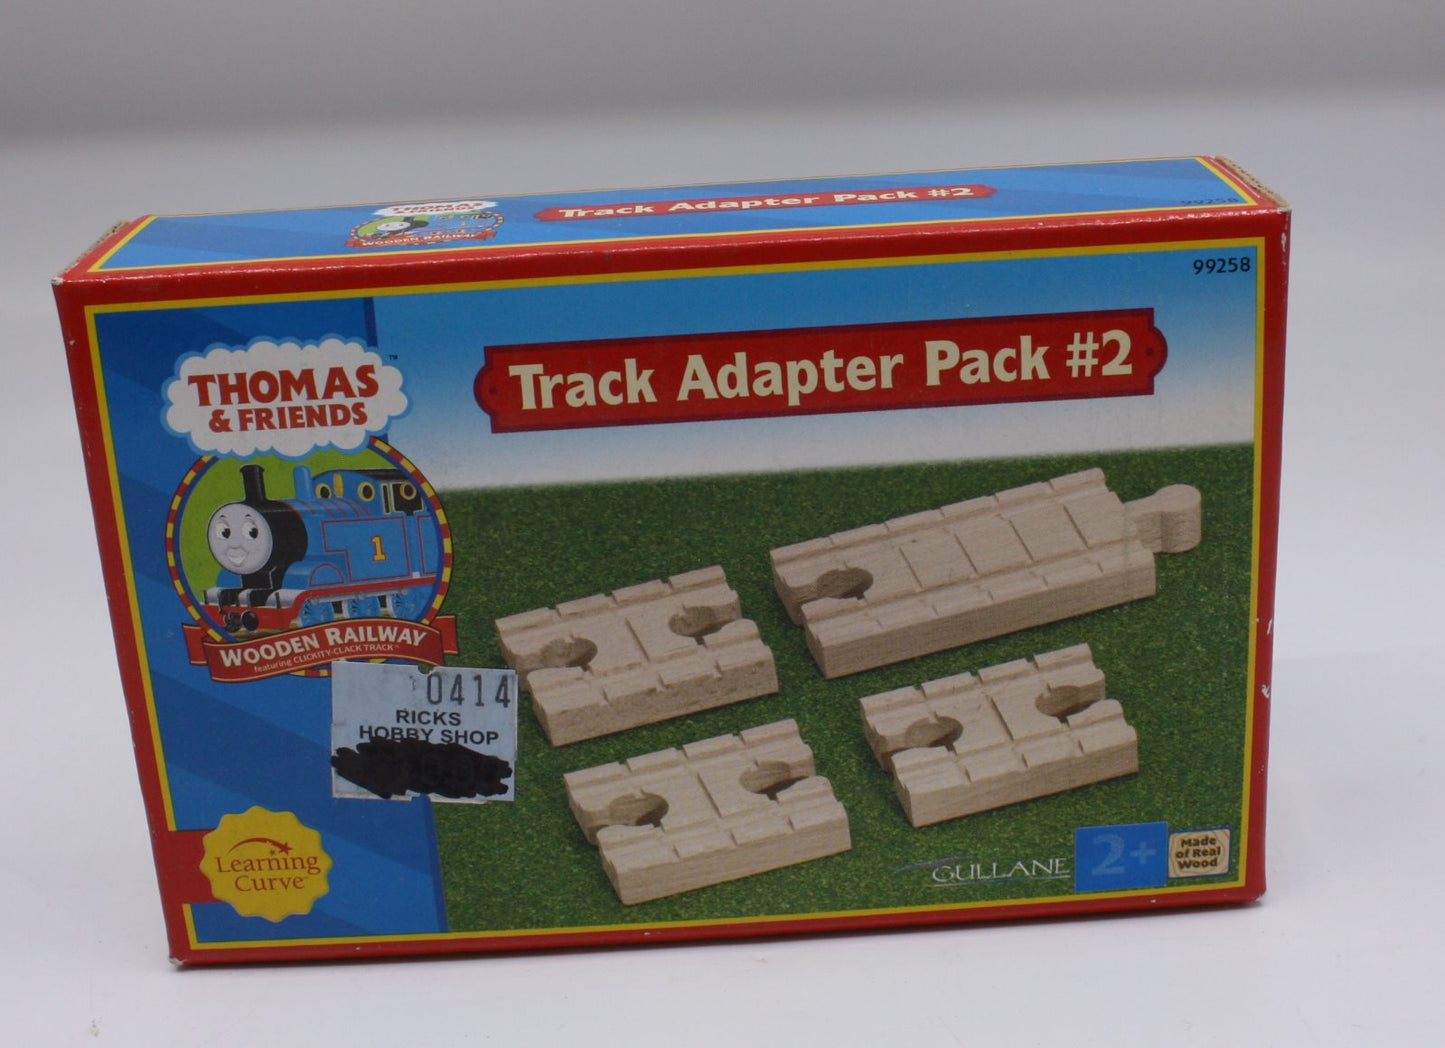 Learning Curve 99258 Thomas and Friends Track Adapter Pack #2